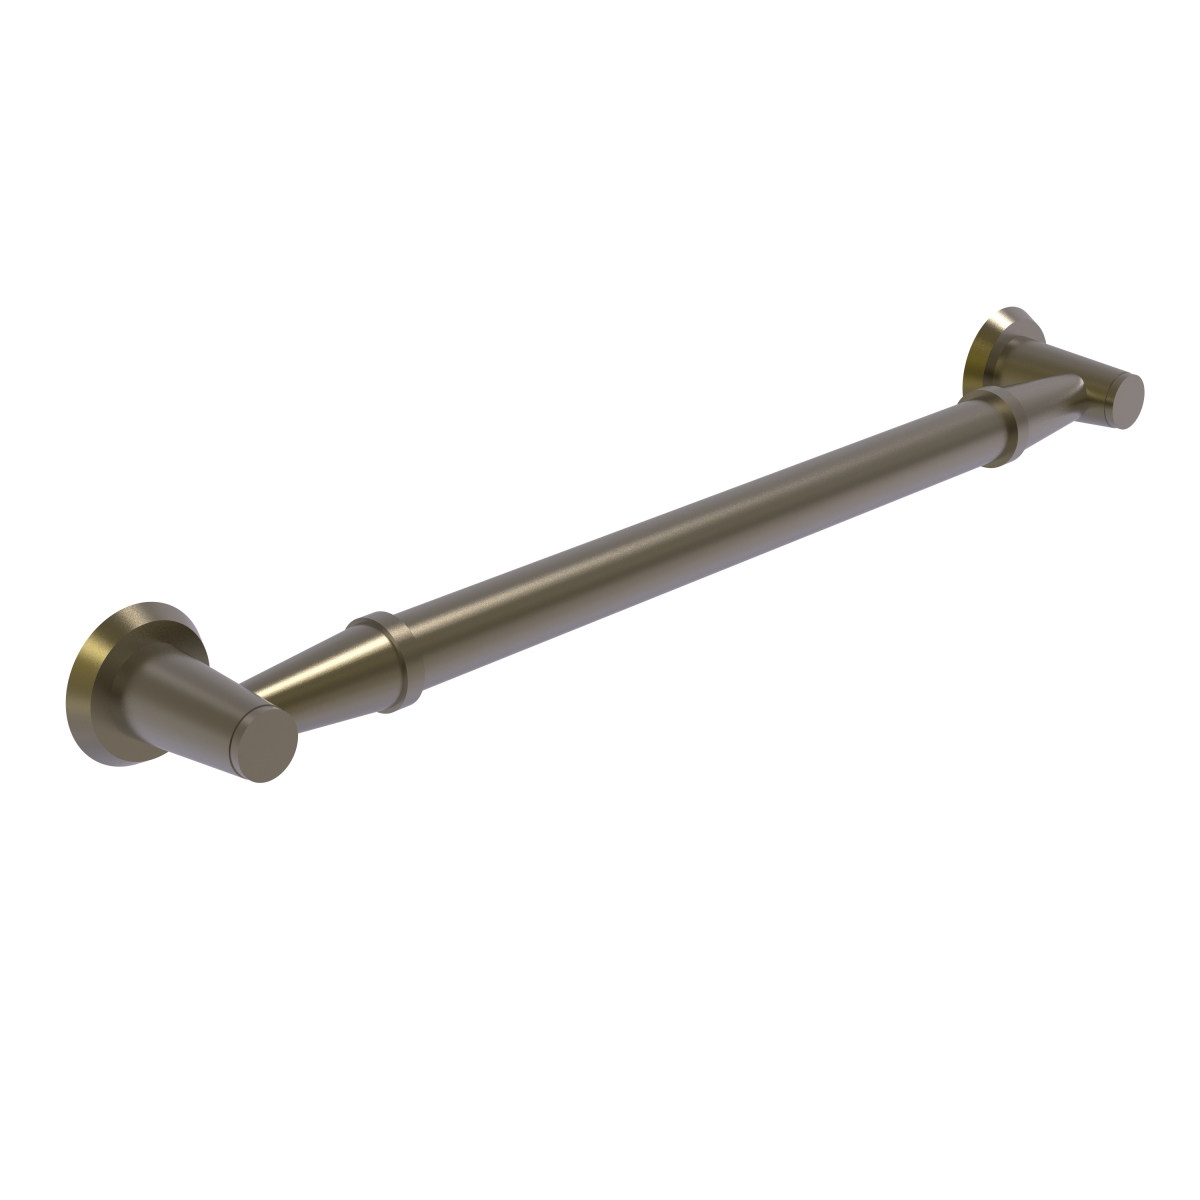 Picture of Allied Brass MD-GRS-16-ABR 16 in. Grab Bar Smooth, Antique Brass - 3.5 x 18 x 16 in.